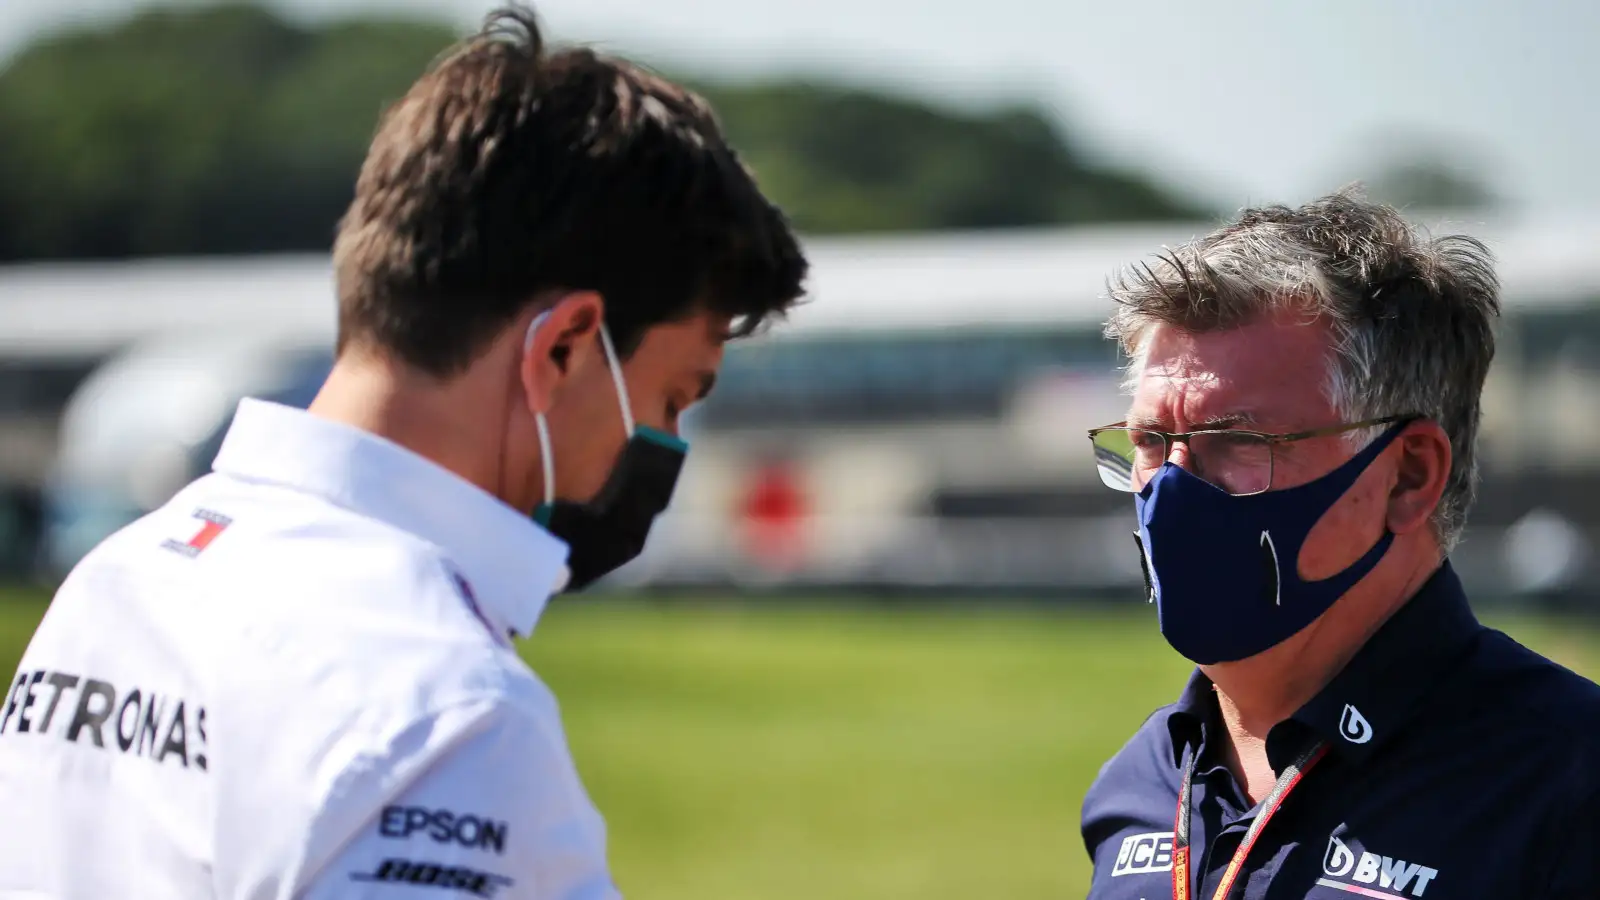 Otmar Szafnauer, then of Racing Point, speaks with Mercedes' Toto Wolff. Britain July 2020